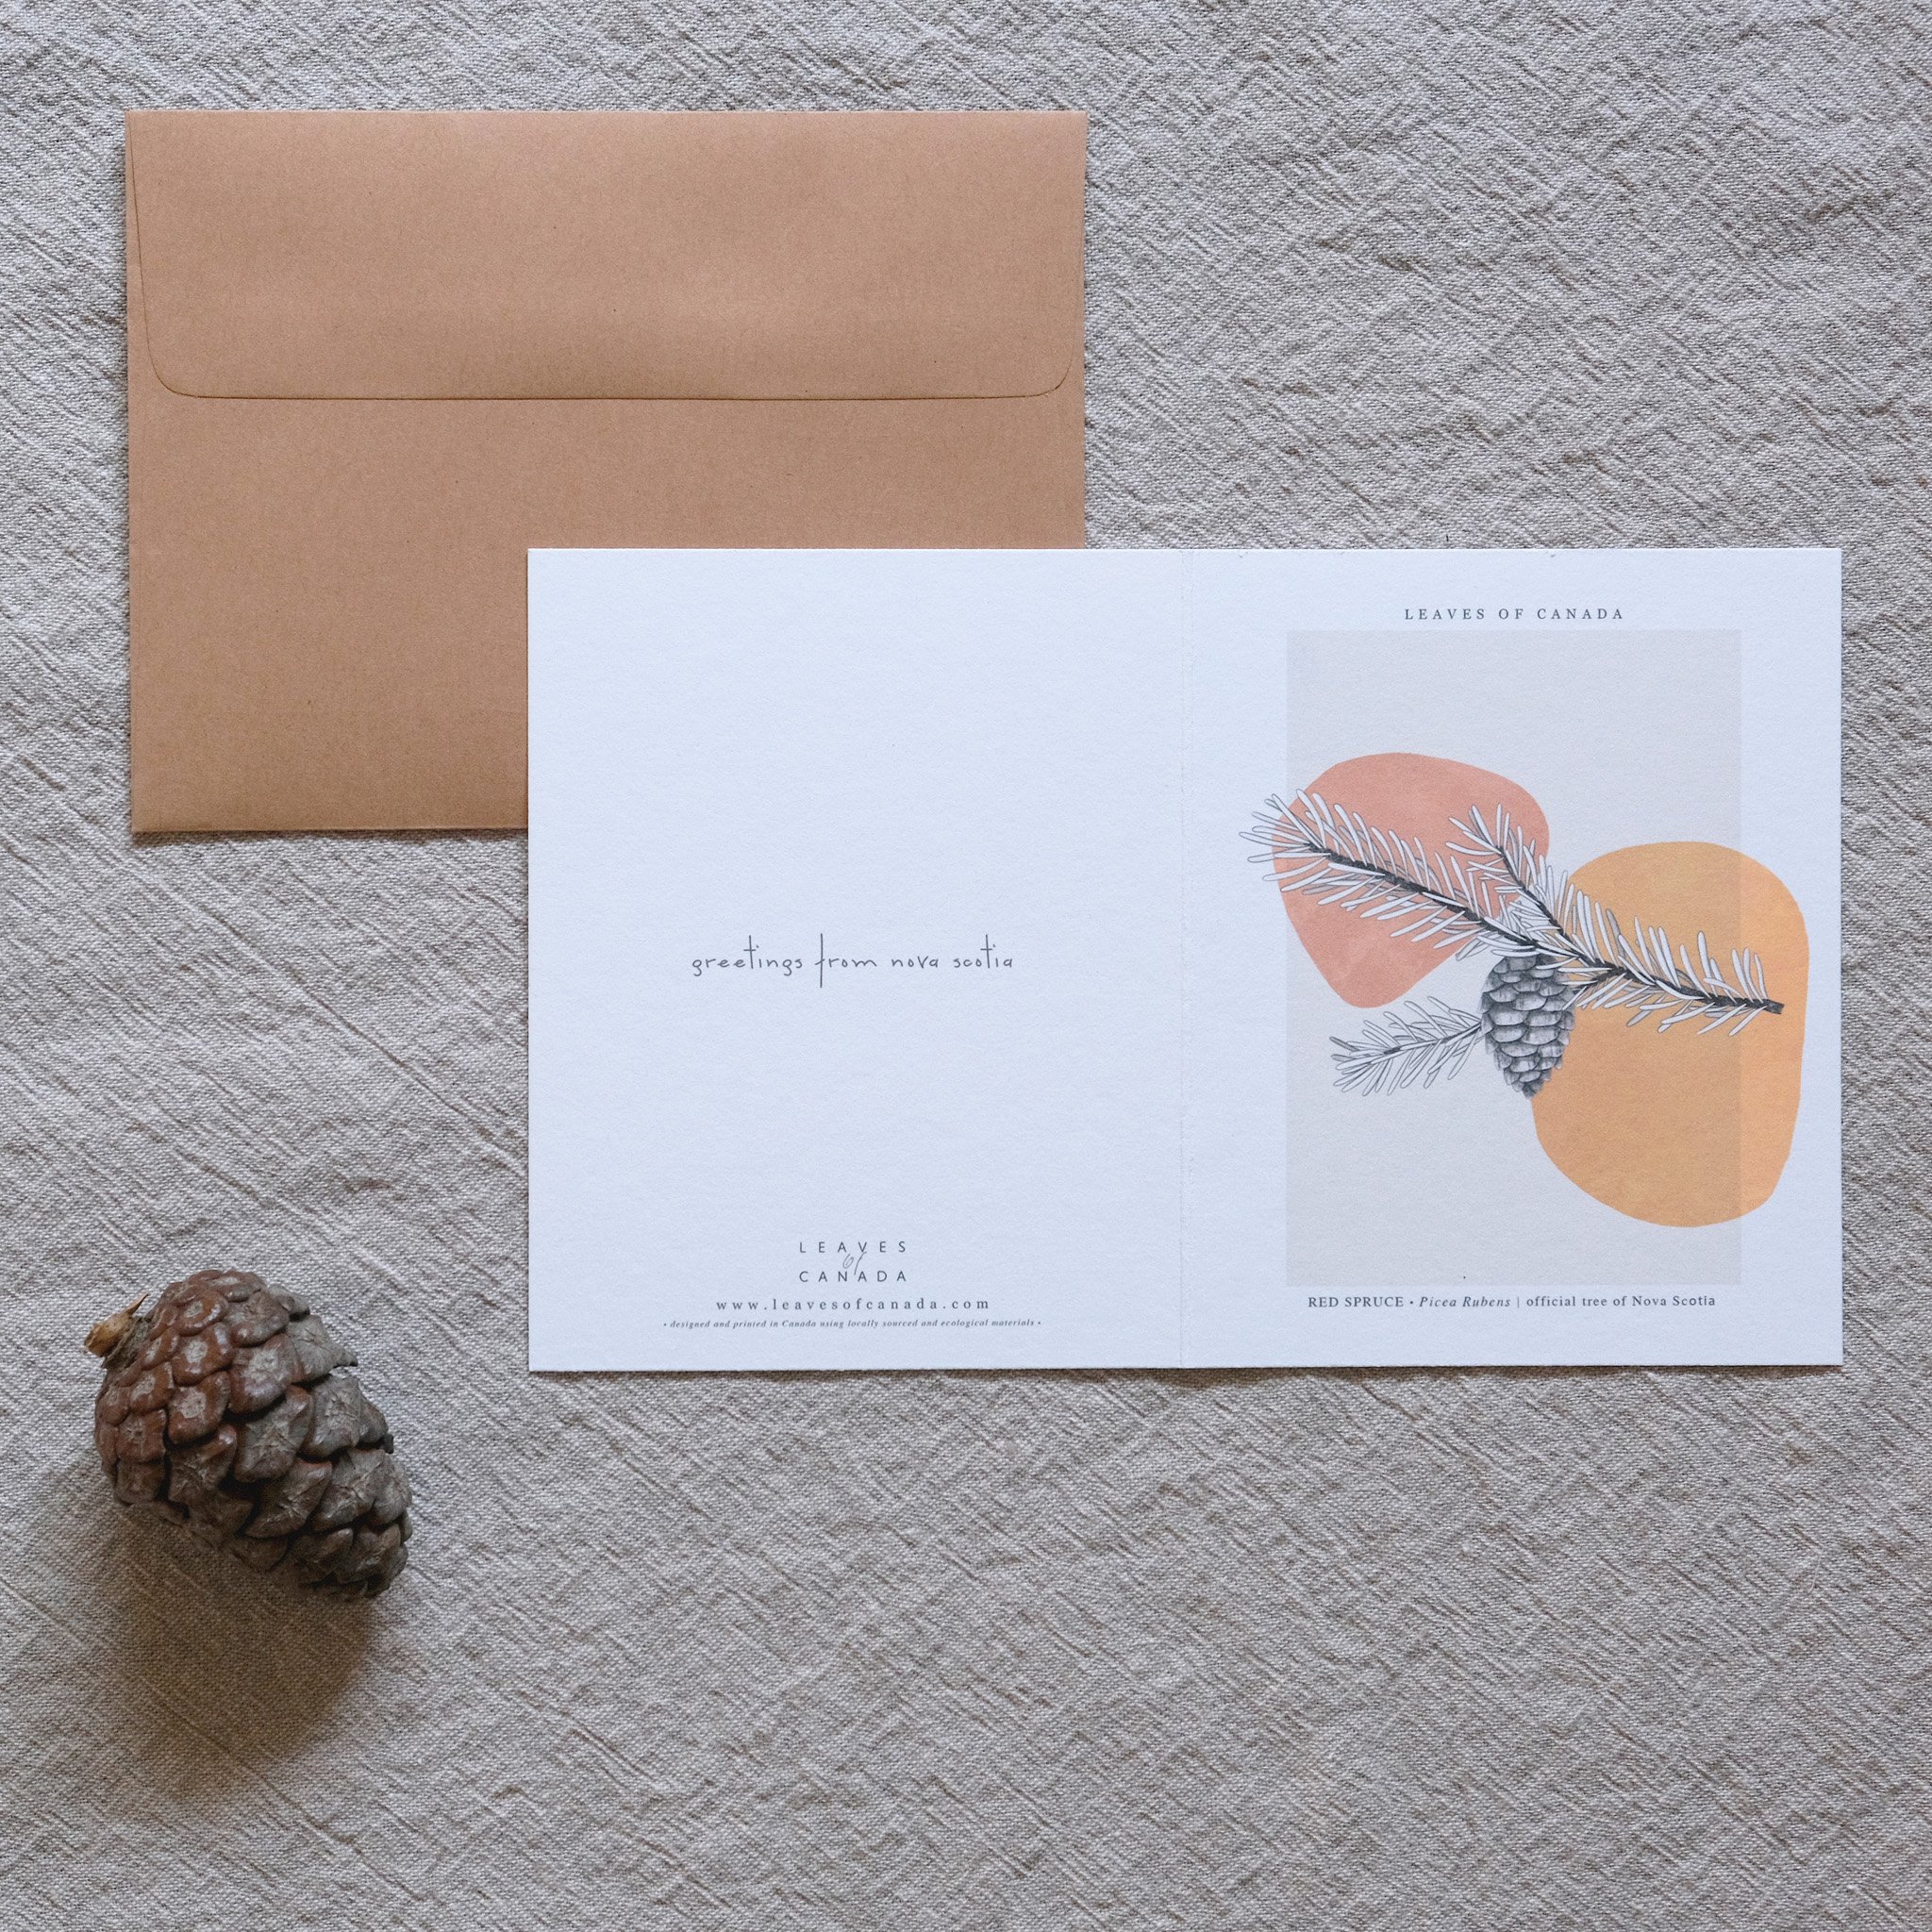 Image of a botanical postcard Nova Scotia Canada in front of a golden envelope on a gray background next to a spruce cone